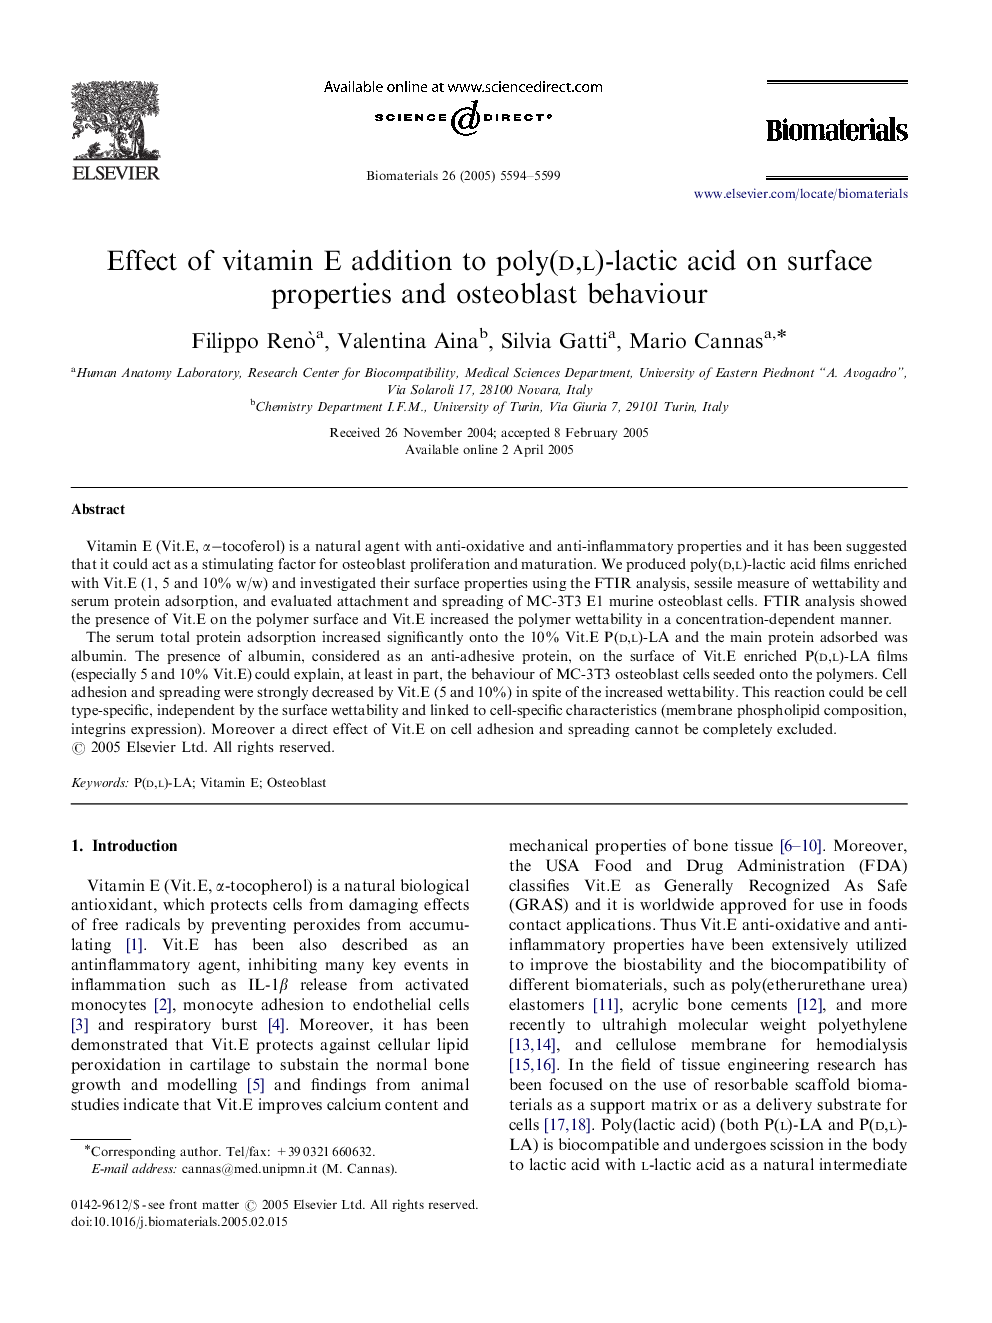 Effect of vitamin E addition to poly(d,l)-lactic acid on surface properties and osteoblast behaviour